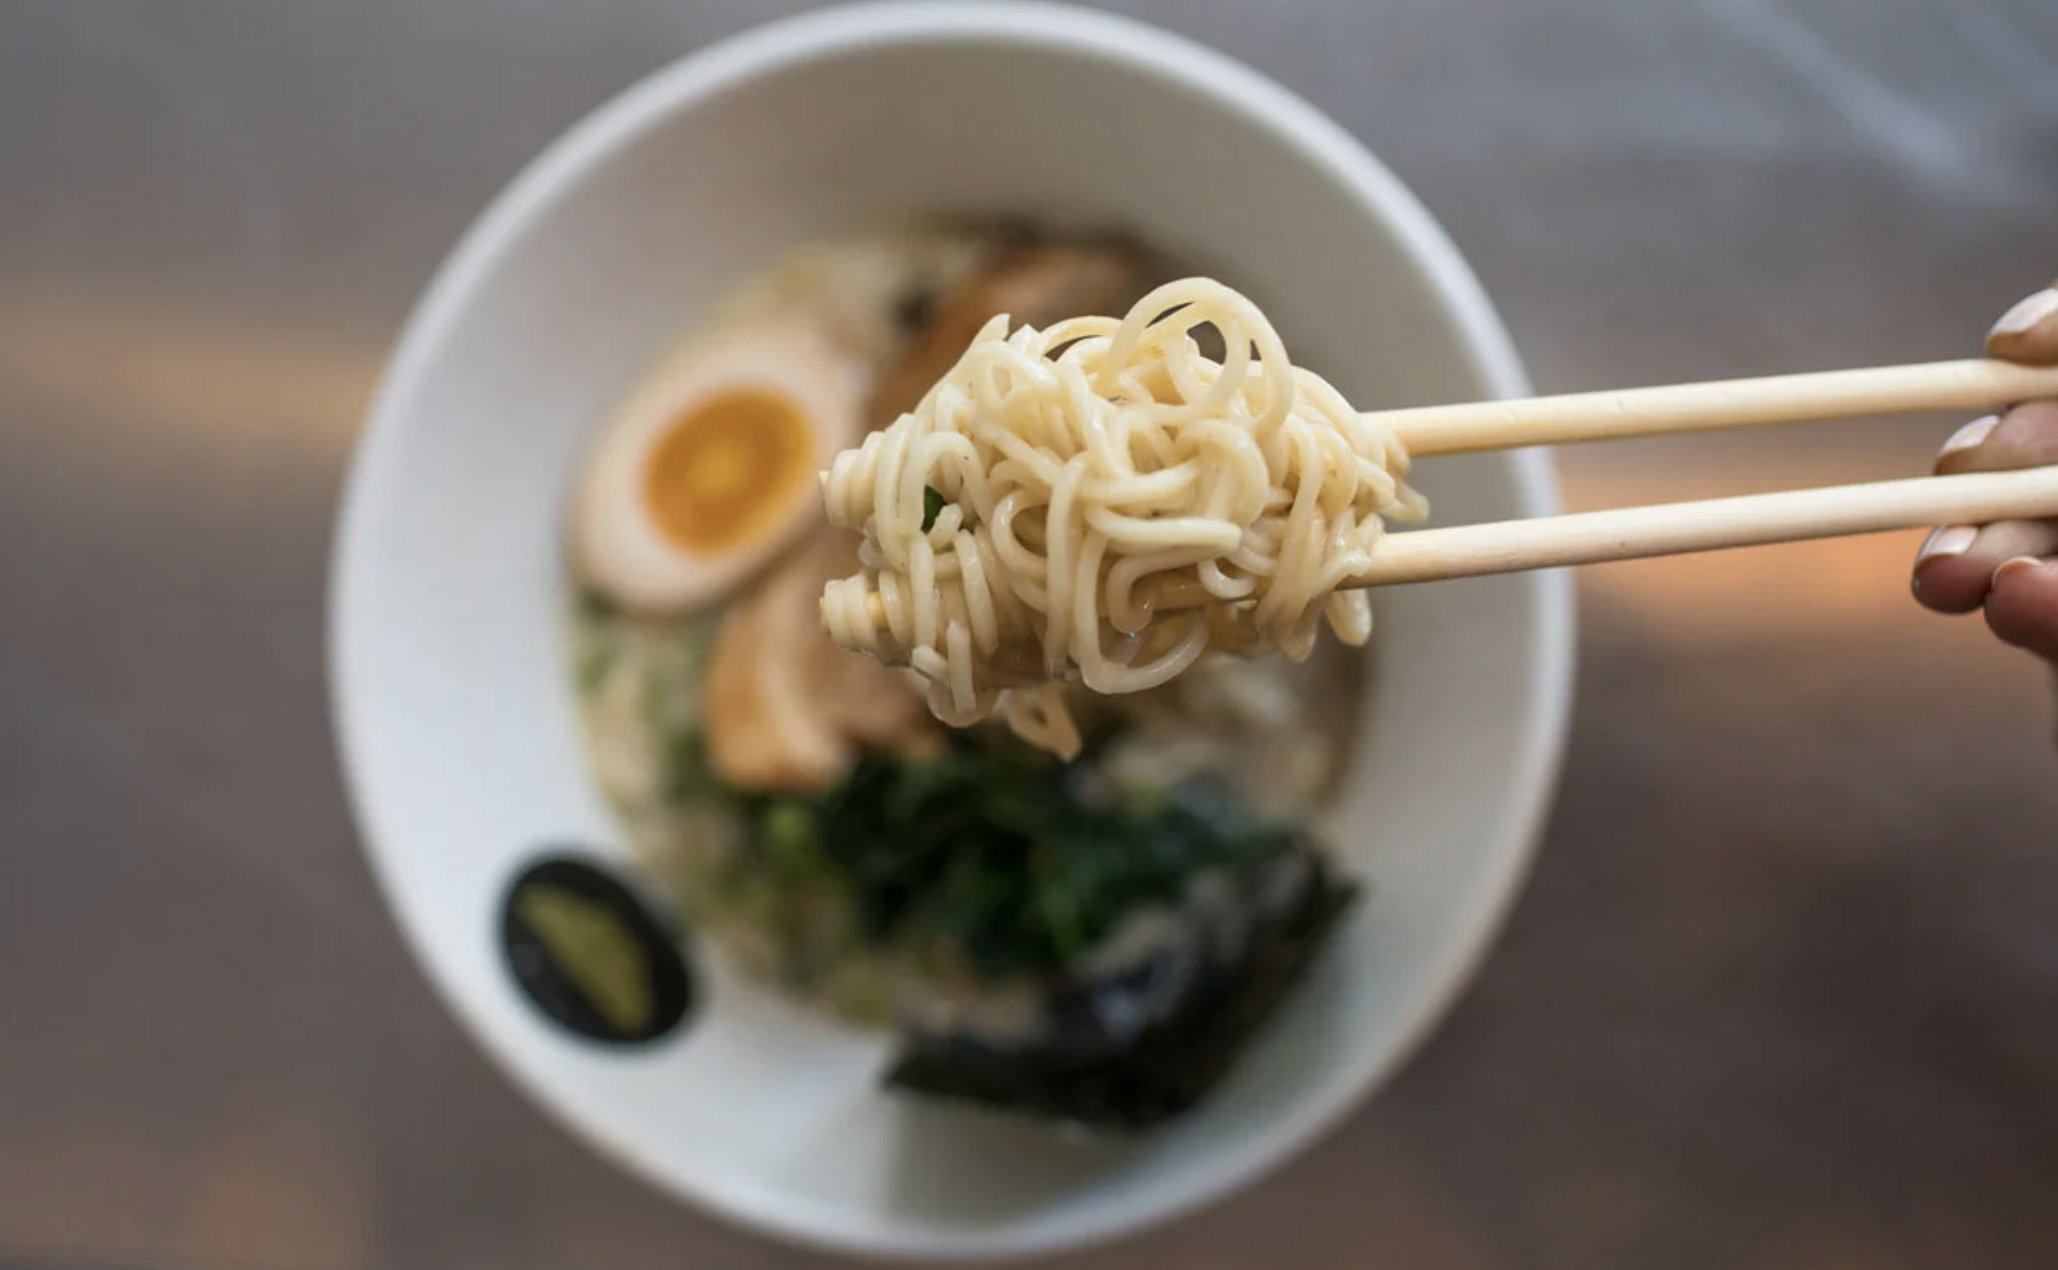 Chopsticks lift a tangle of ramen noodles from a bowl filled with hard-boiled egg, seaweed, and broth; topdown view.